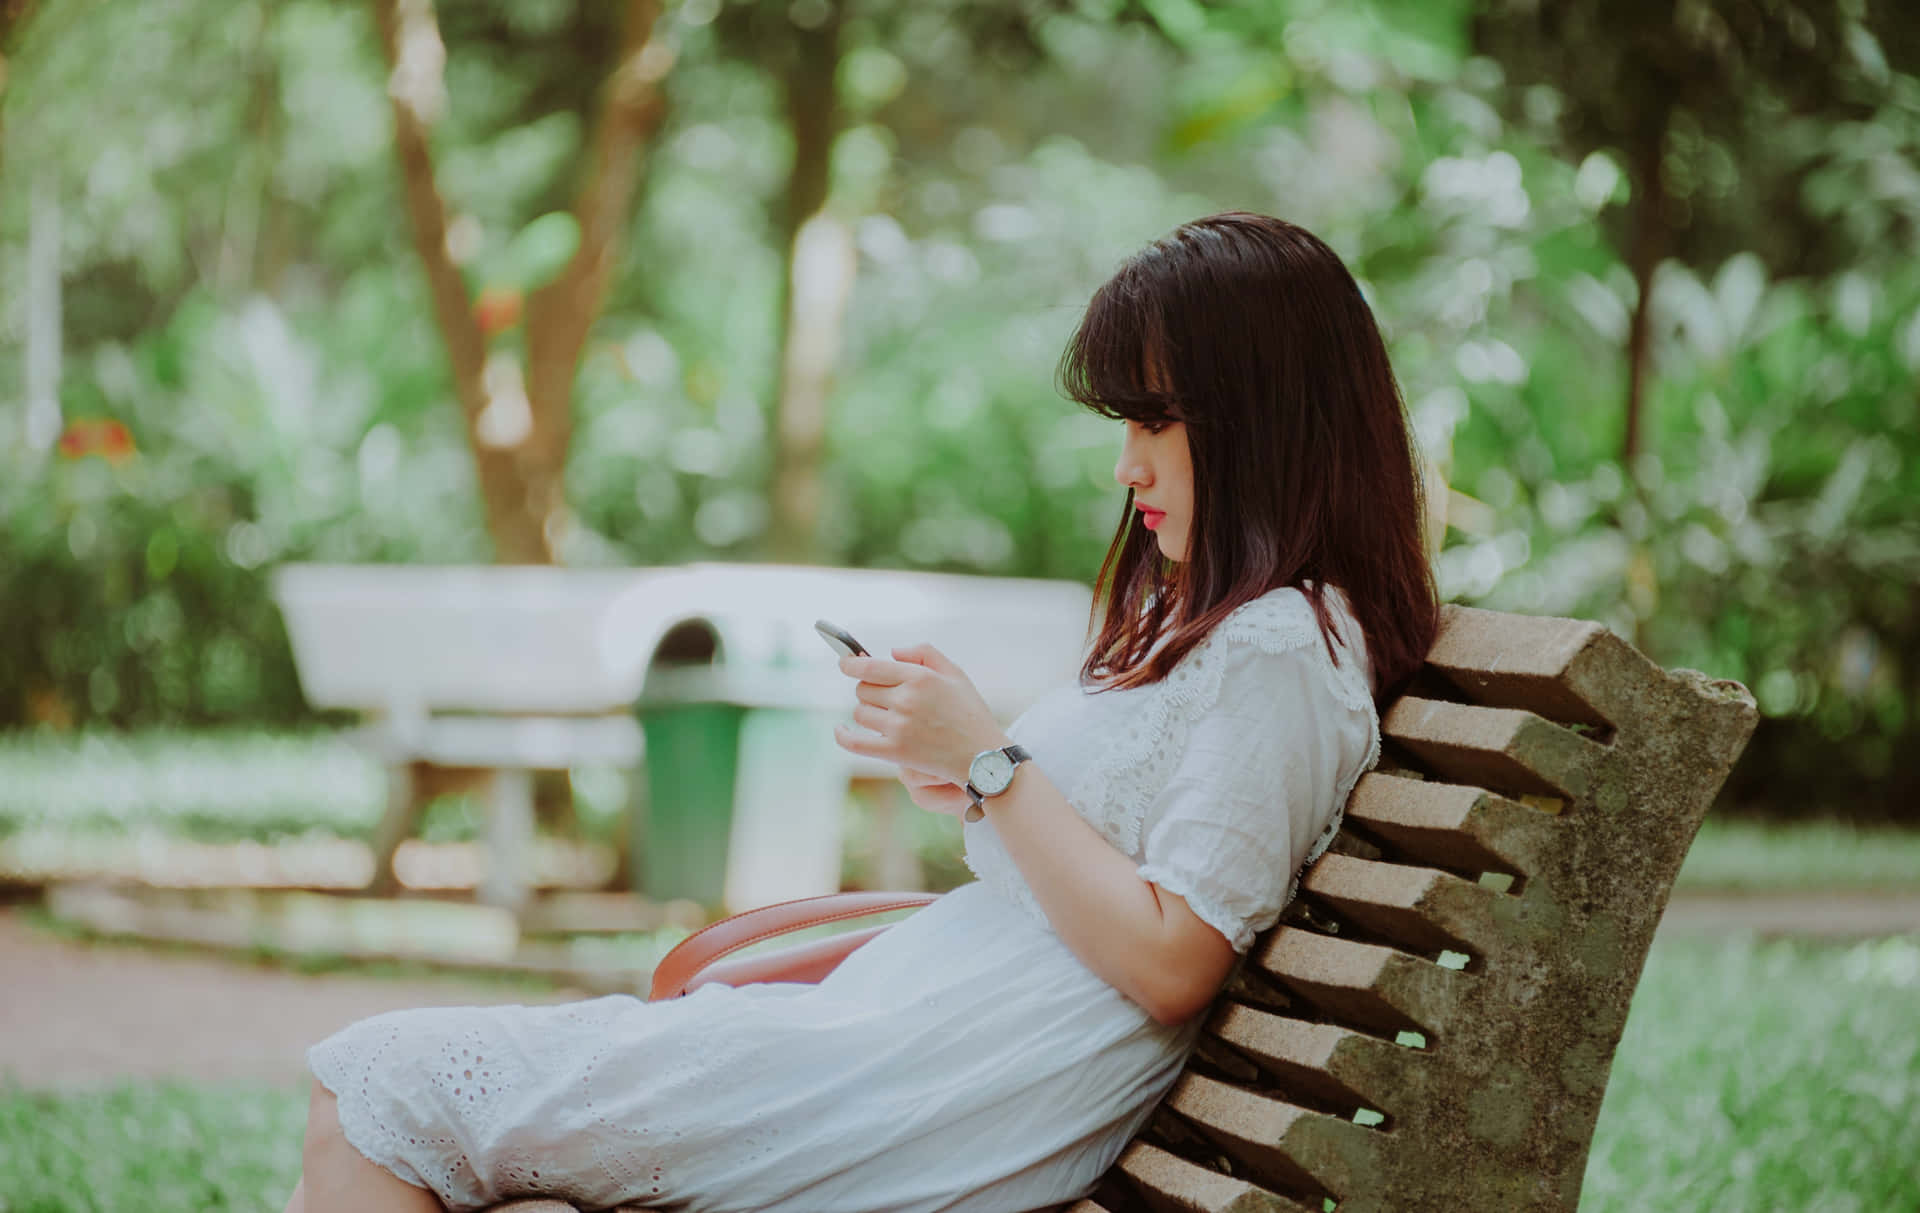 A Woman Sitting On A Bench Looking At Her Phone